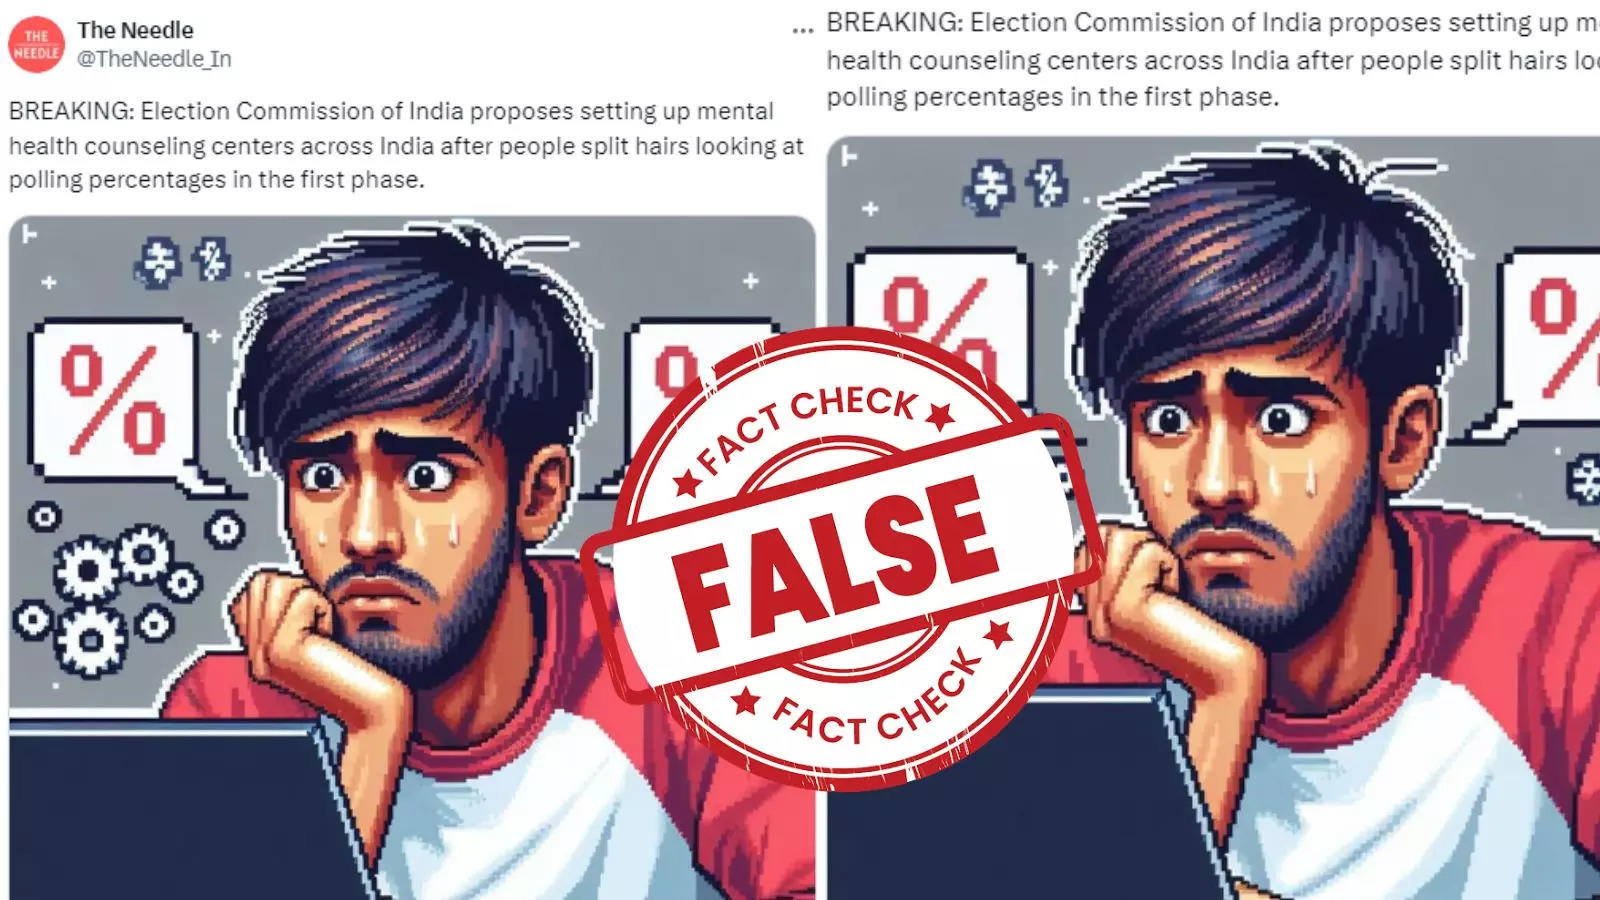 Fact Check: Did the Election Commission make any proposal regarding mental health counseling center? Know the truth of the viral post